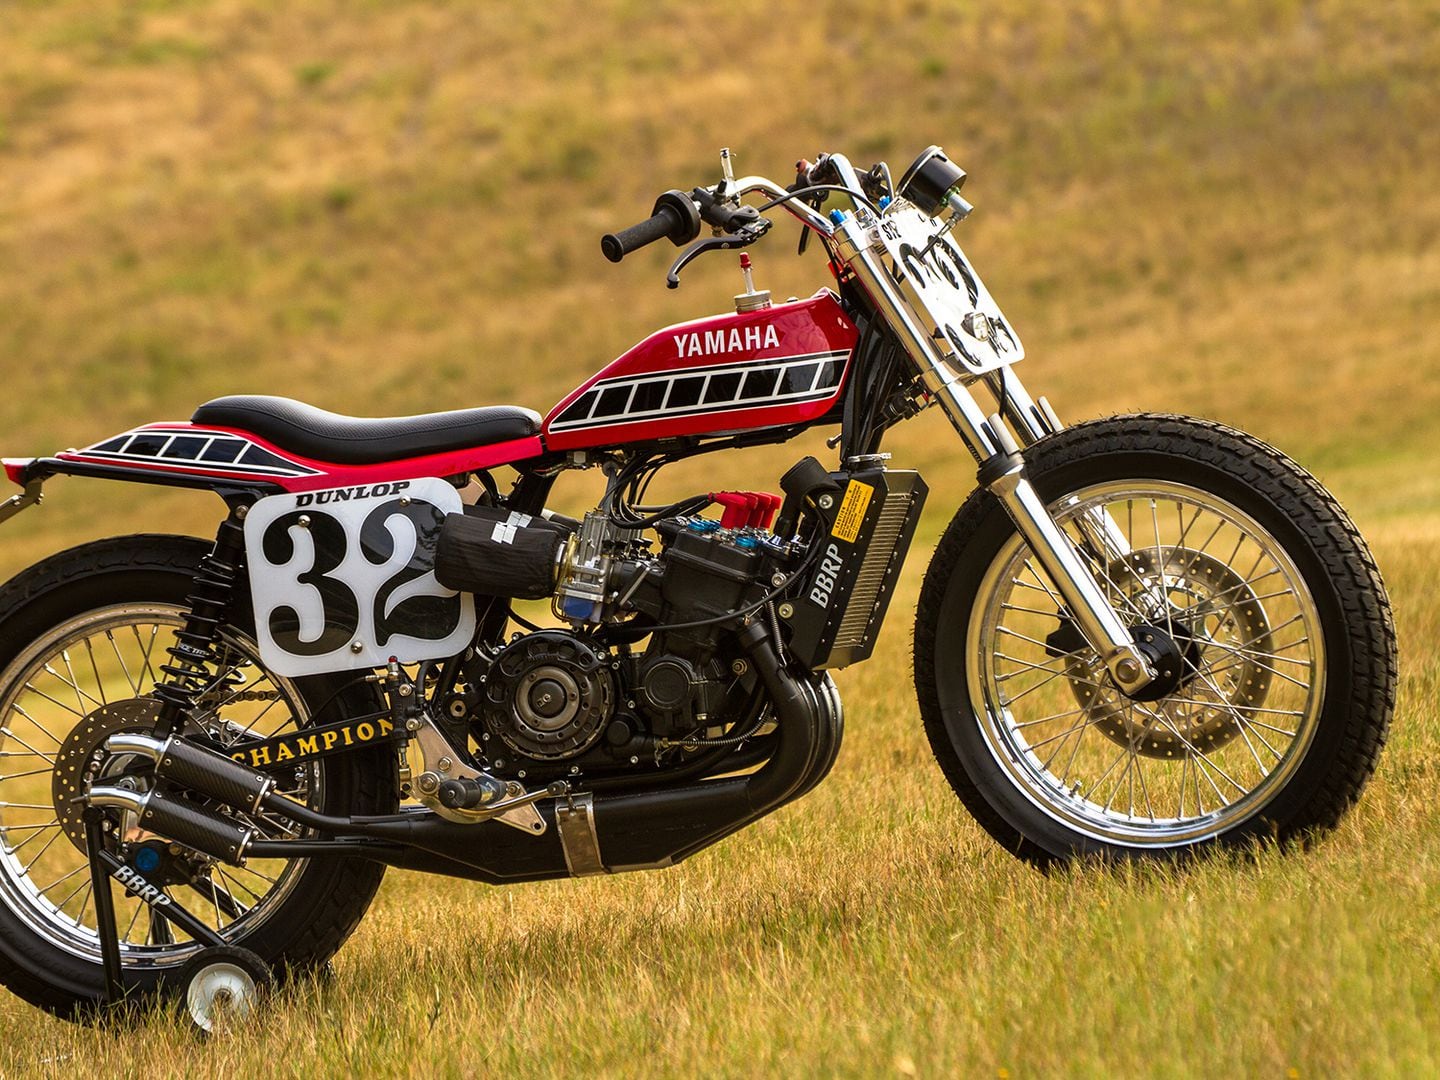 This scary TZ750 flat track racer is also street legal